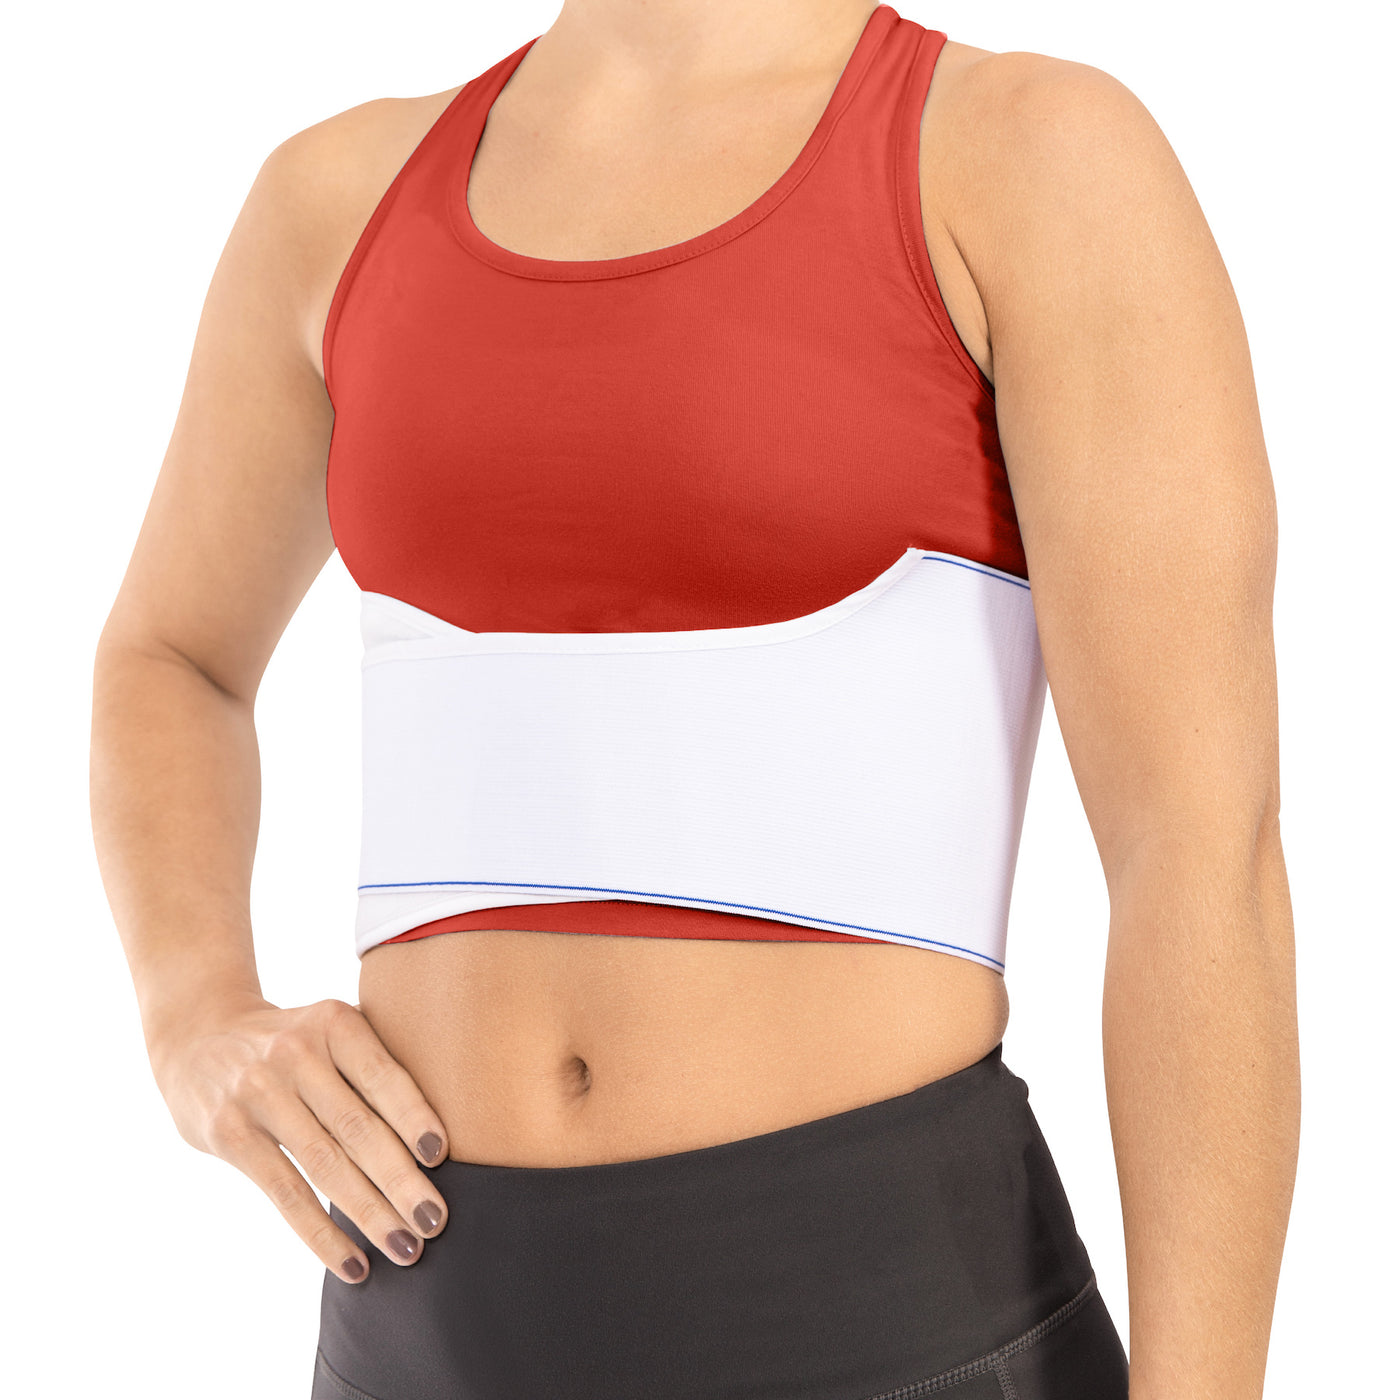 Adjustable Rib Straps, Chest Straps to Fix Fractures, Breathable